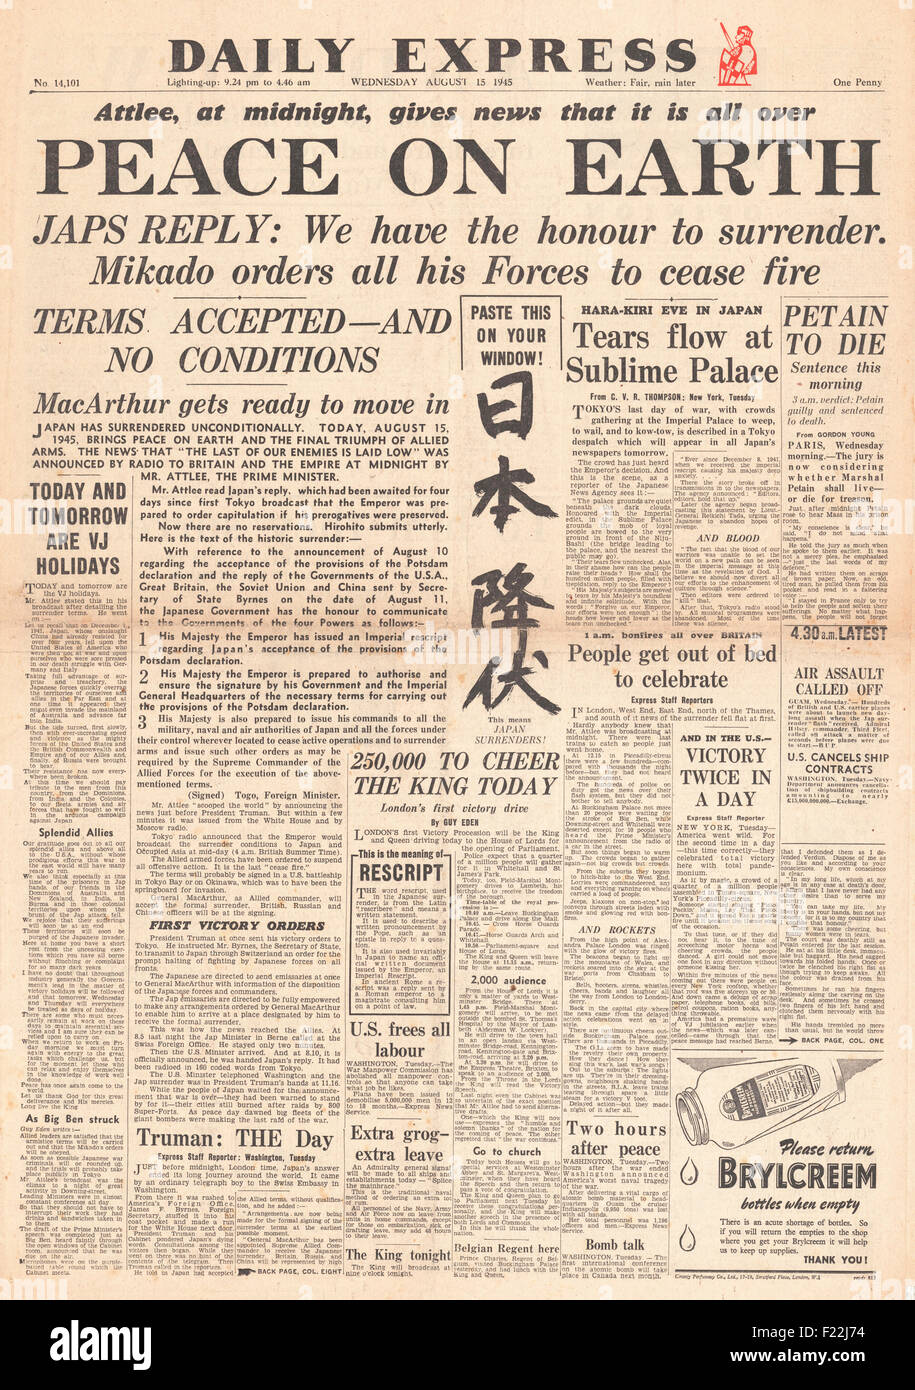 Serena couscous Arena 1945 front page Daily Express reporting the end of World War Two and VJ Day  Stock Photo - Alamy